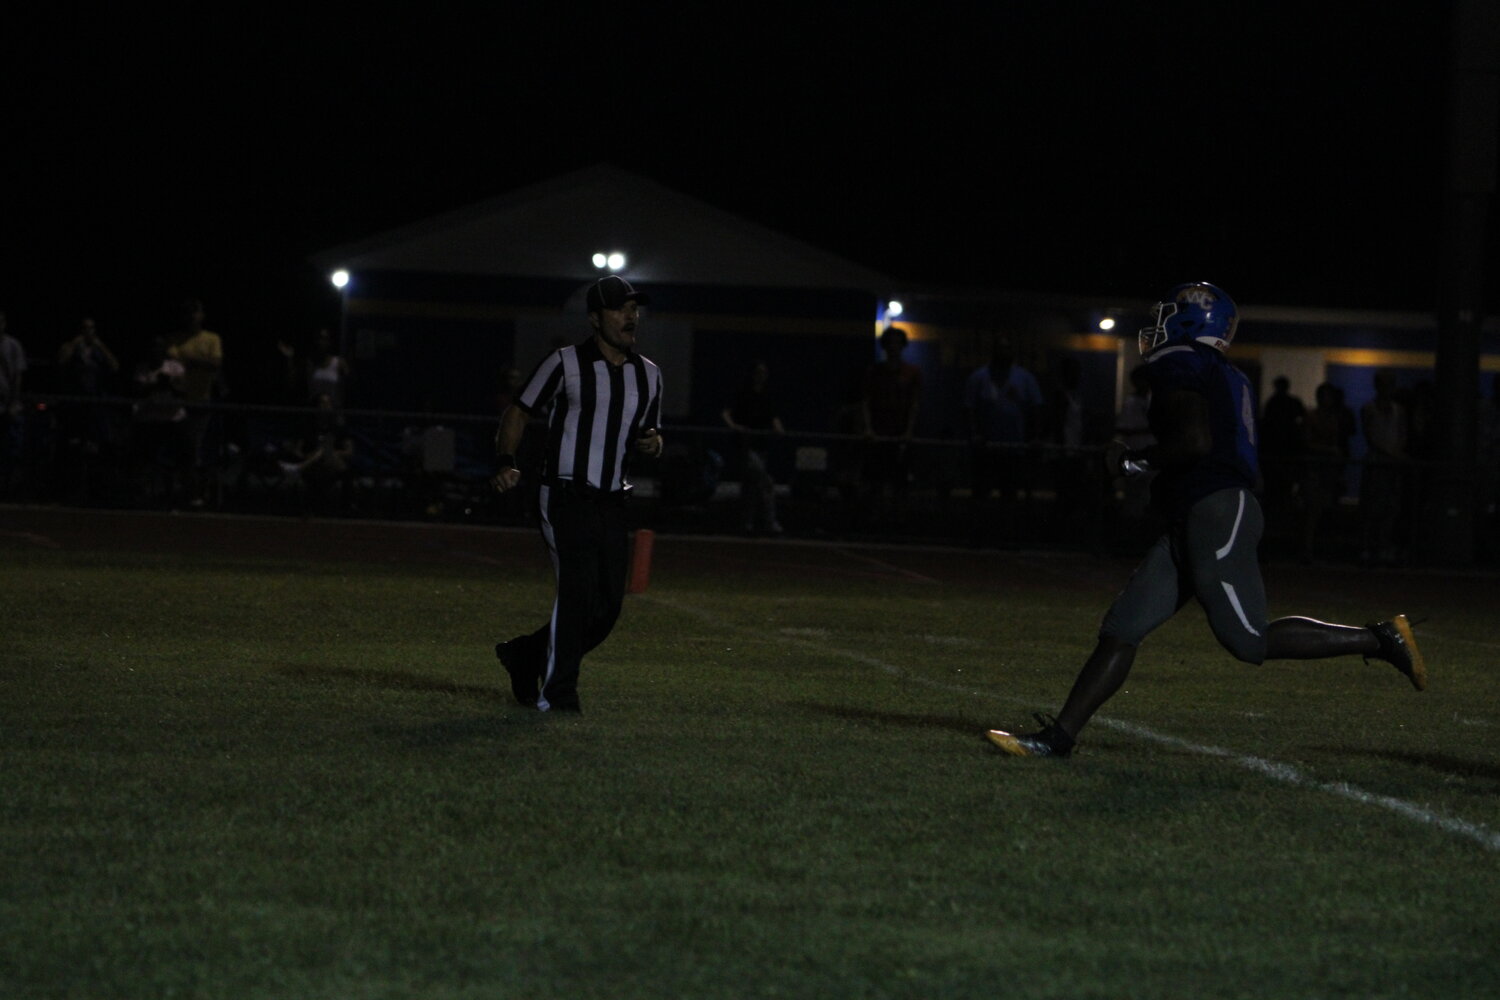 Carleon Jones scores a touchdown during the Wright City-Winfield game.